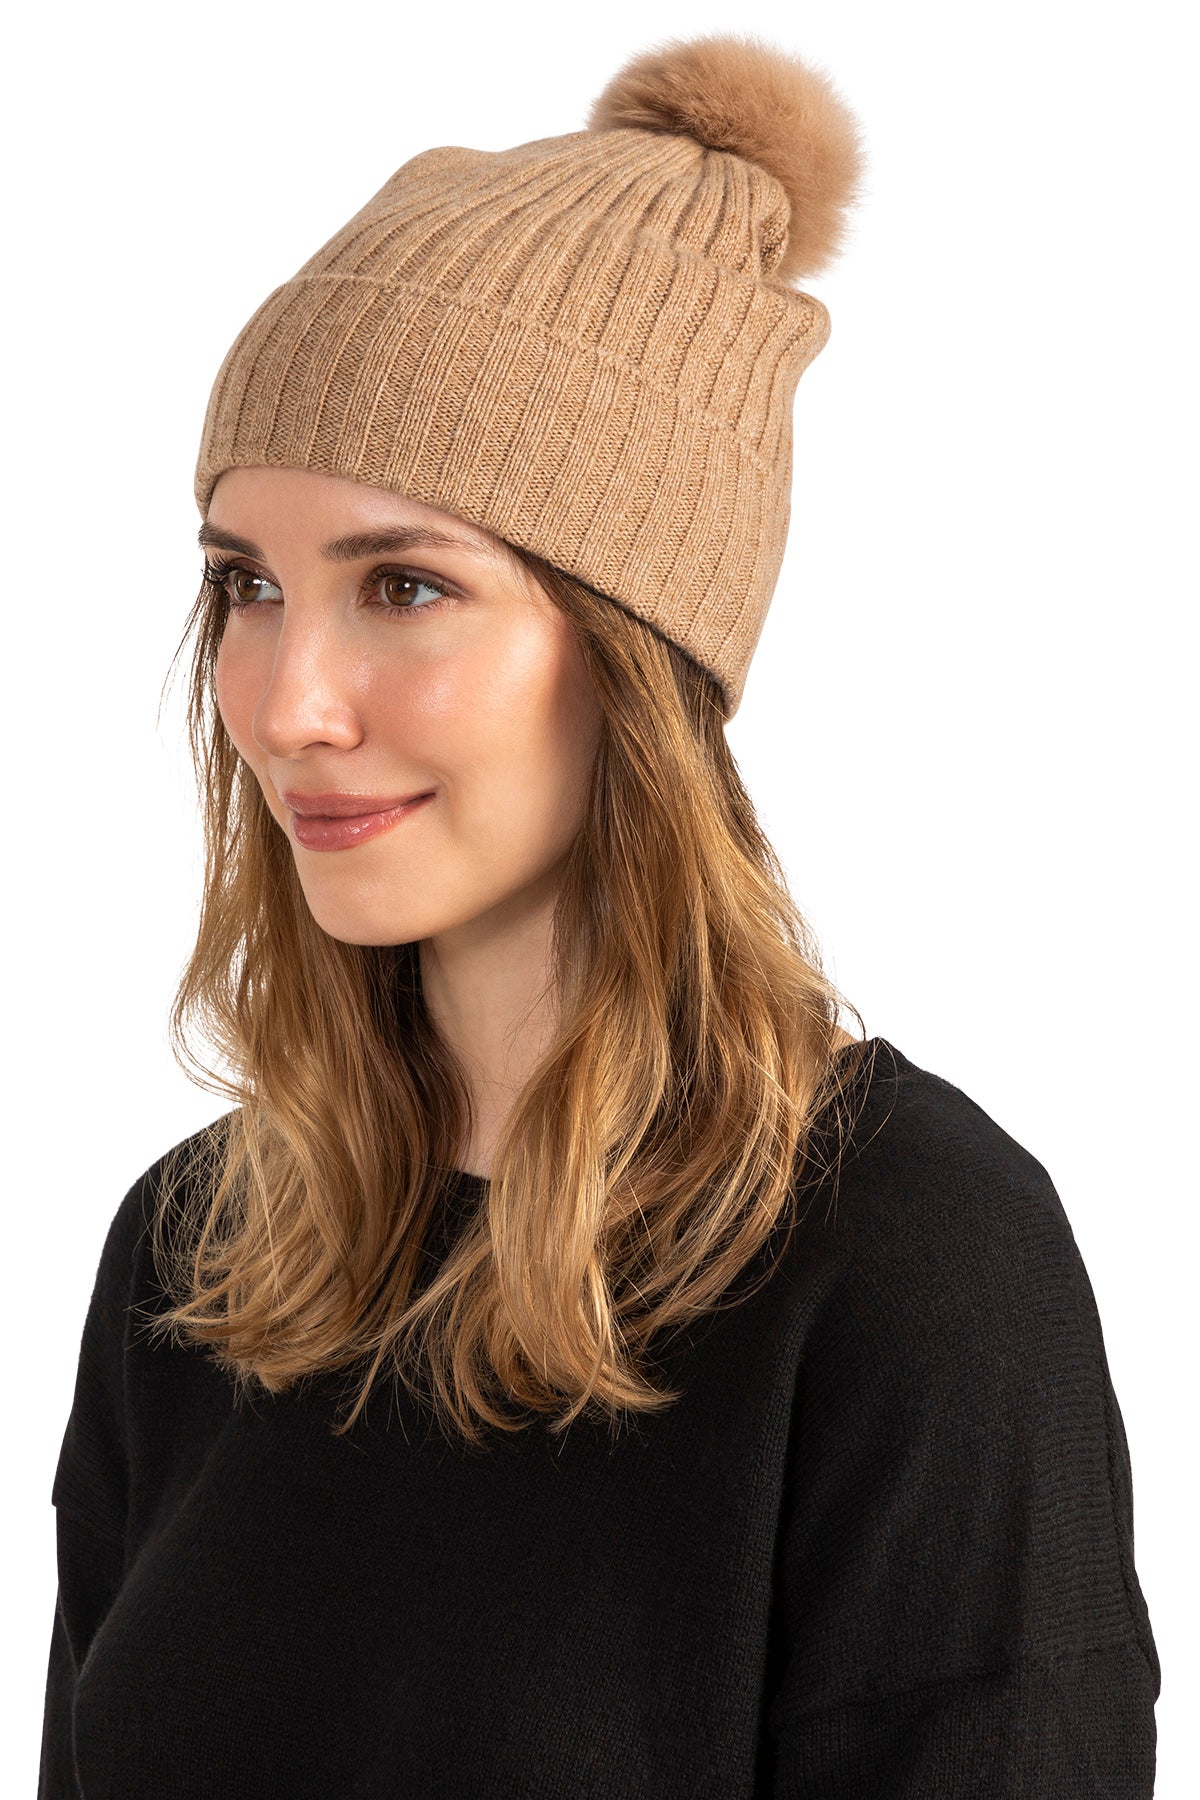 Women's Cashmere Pom Pom Beanie in Oatmeal Grade A Mongolian Cashmere, Winter Hats by Quince